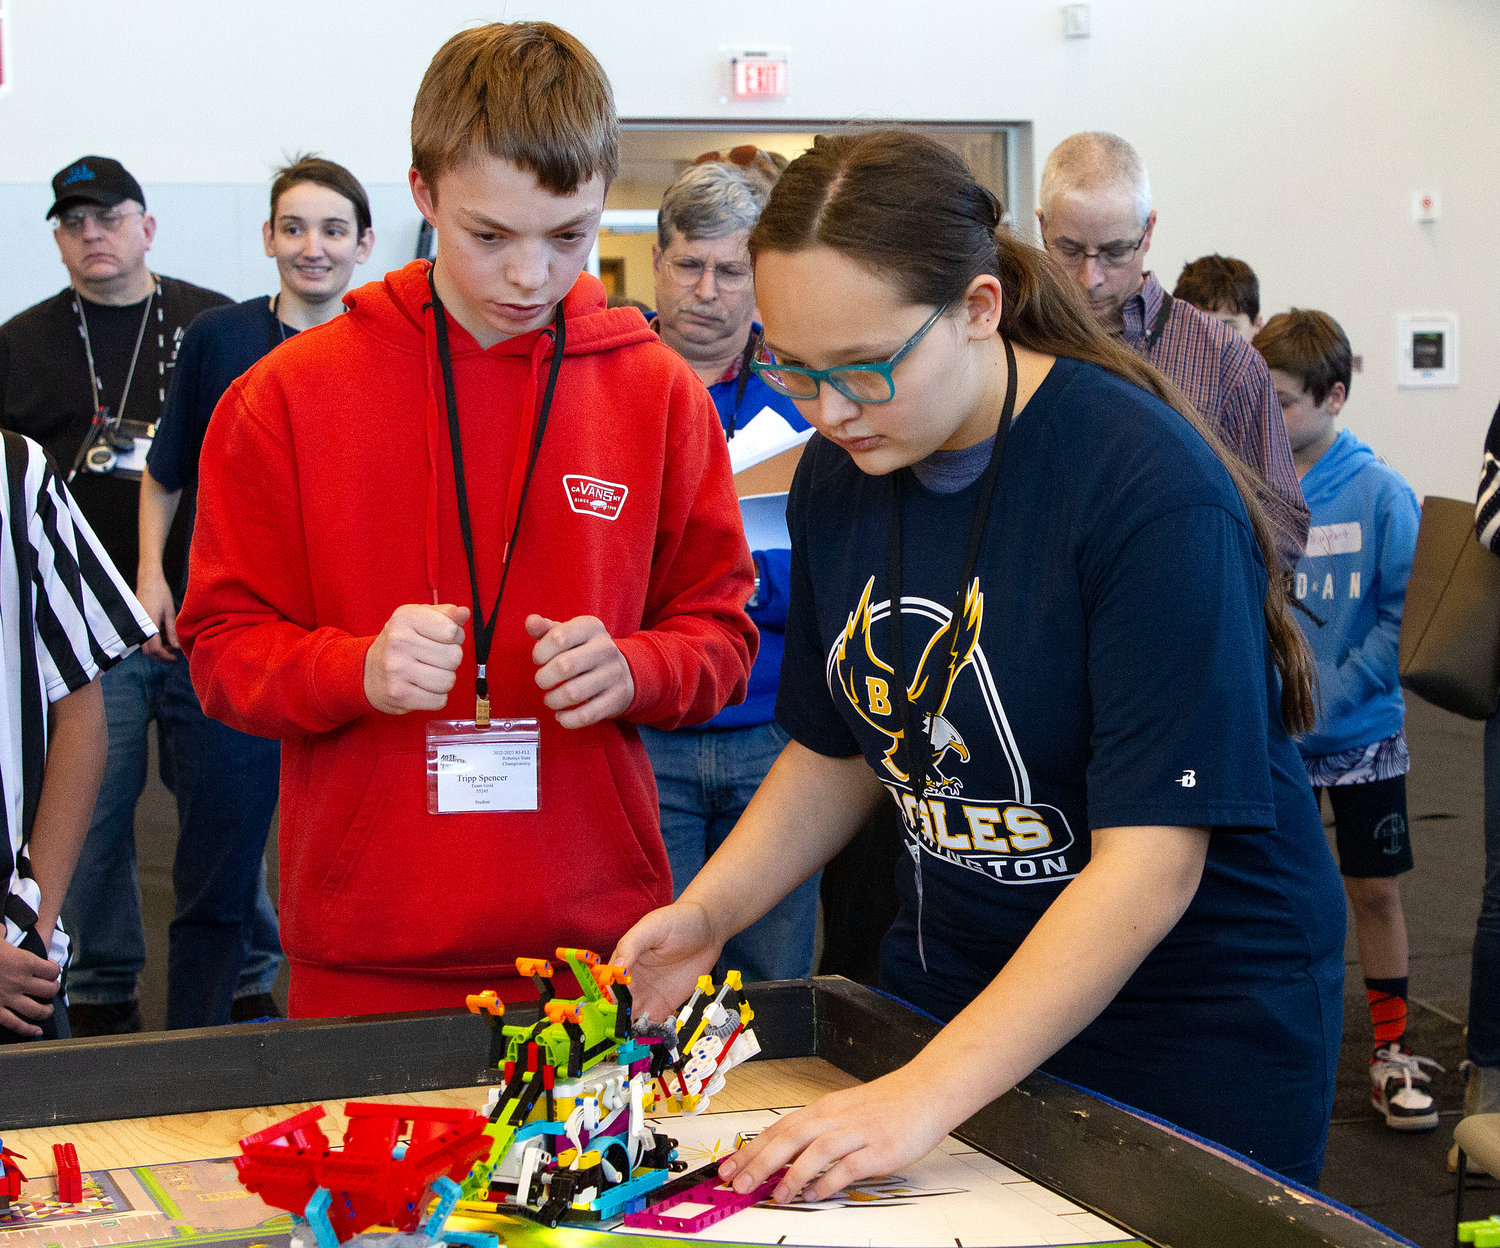 Barrington Middle School's Tripp Spencer (left) and Mie Green work together during the competition.